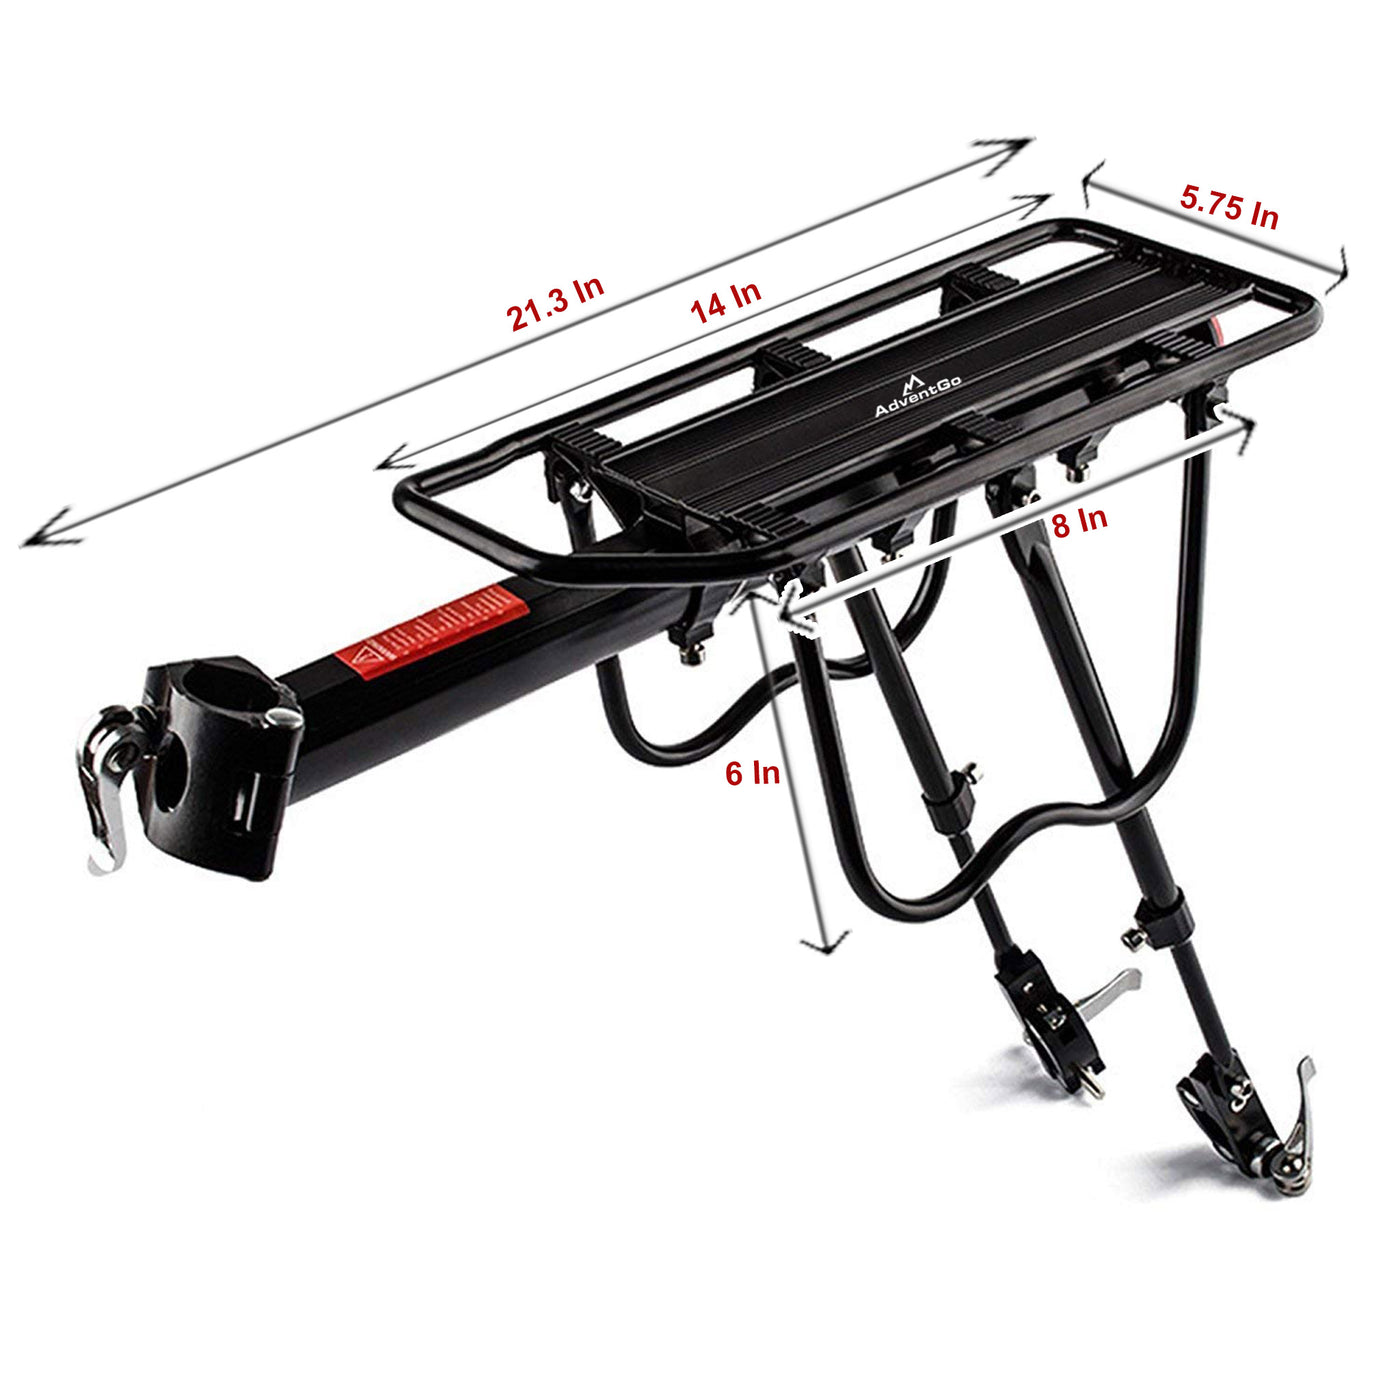 REAR BIKE RACK WITH QUICK RELEASE CLAMPS